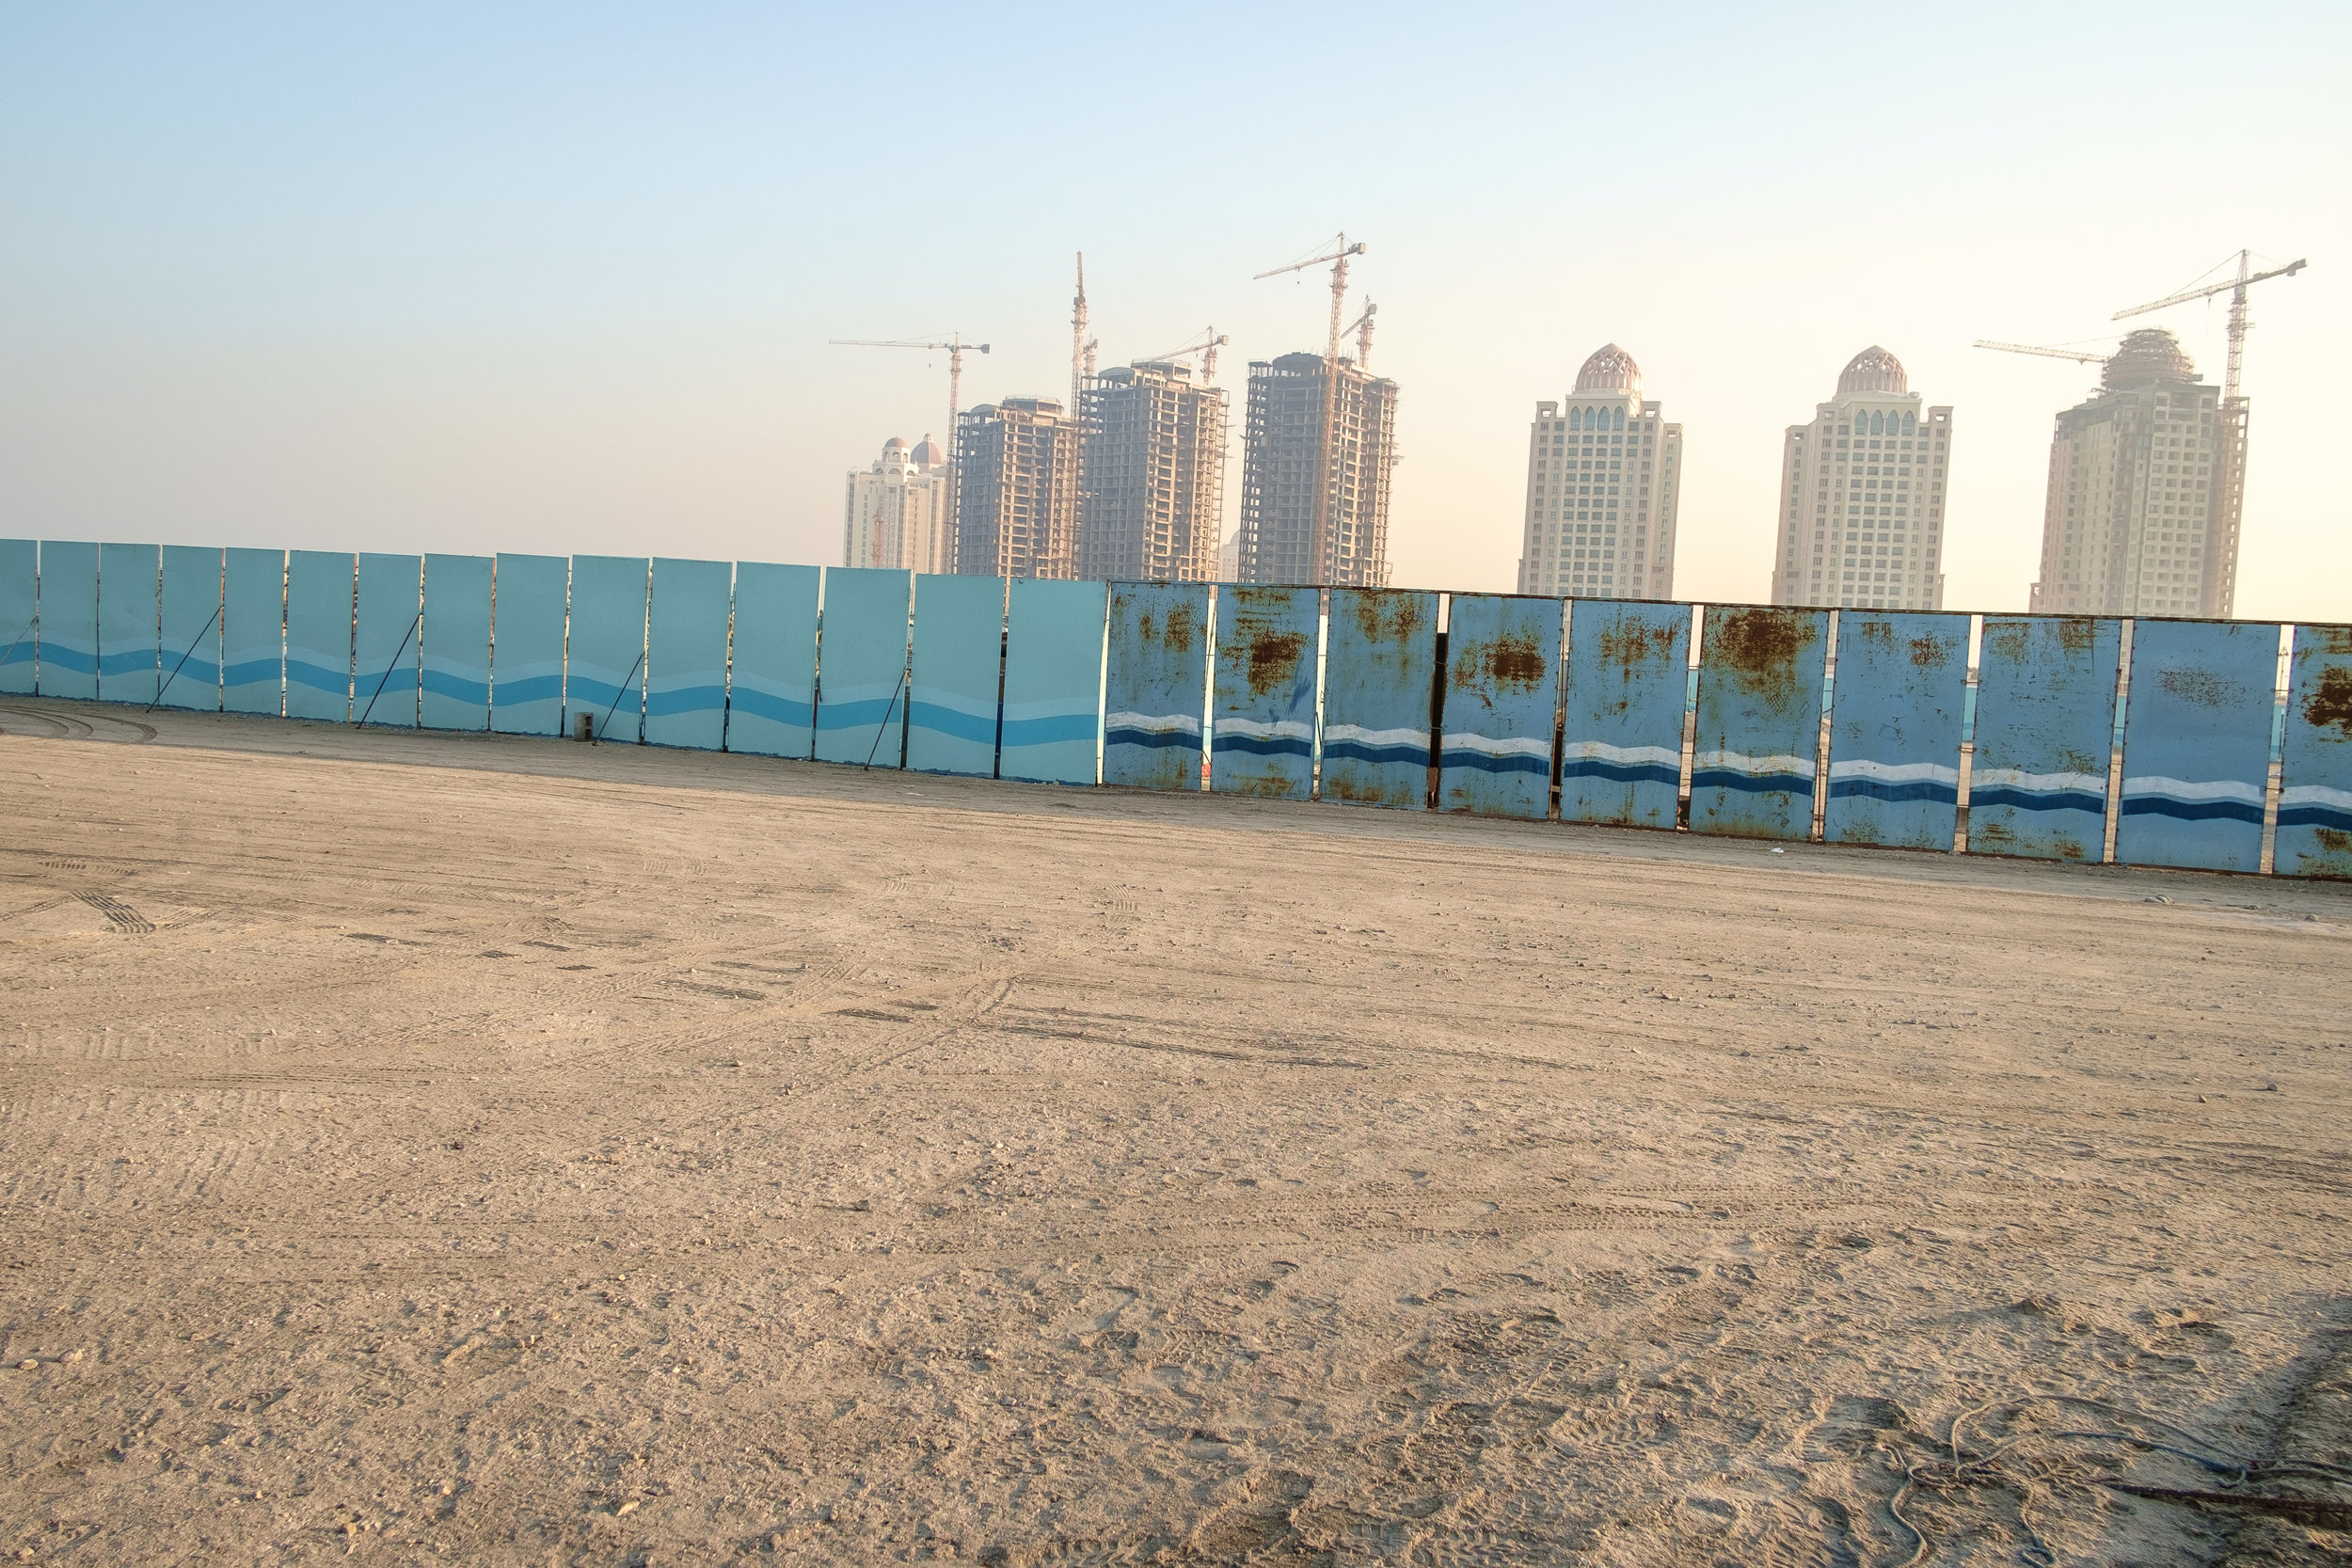  A construction scene on The Pearl with the Viva Bahriya Towers residential development in the background. The Pearl is an artificial island comprising of luxury residential estates and businesses. It is the first land in Qatar made available for own